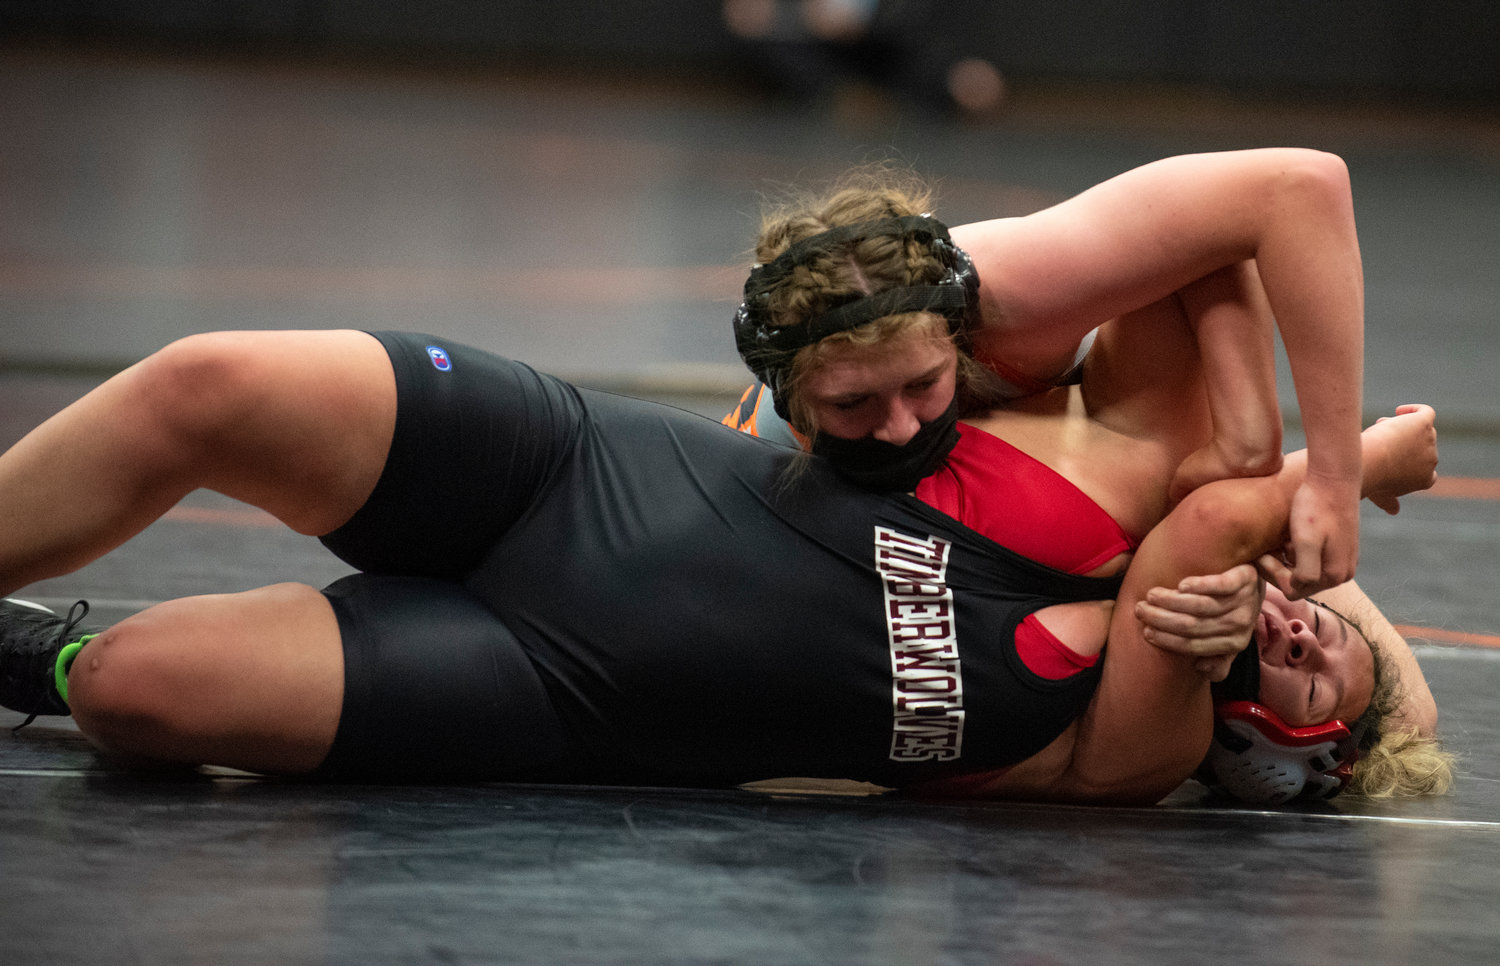 Centralia's Maya Kunkel, top, looks to pin a Black Hills opponent at a wrestling meet Tuesday in Centralia.